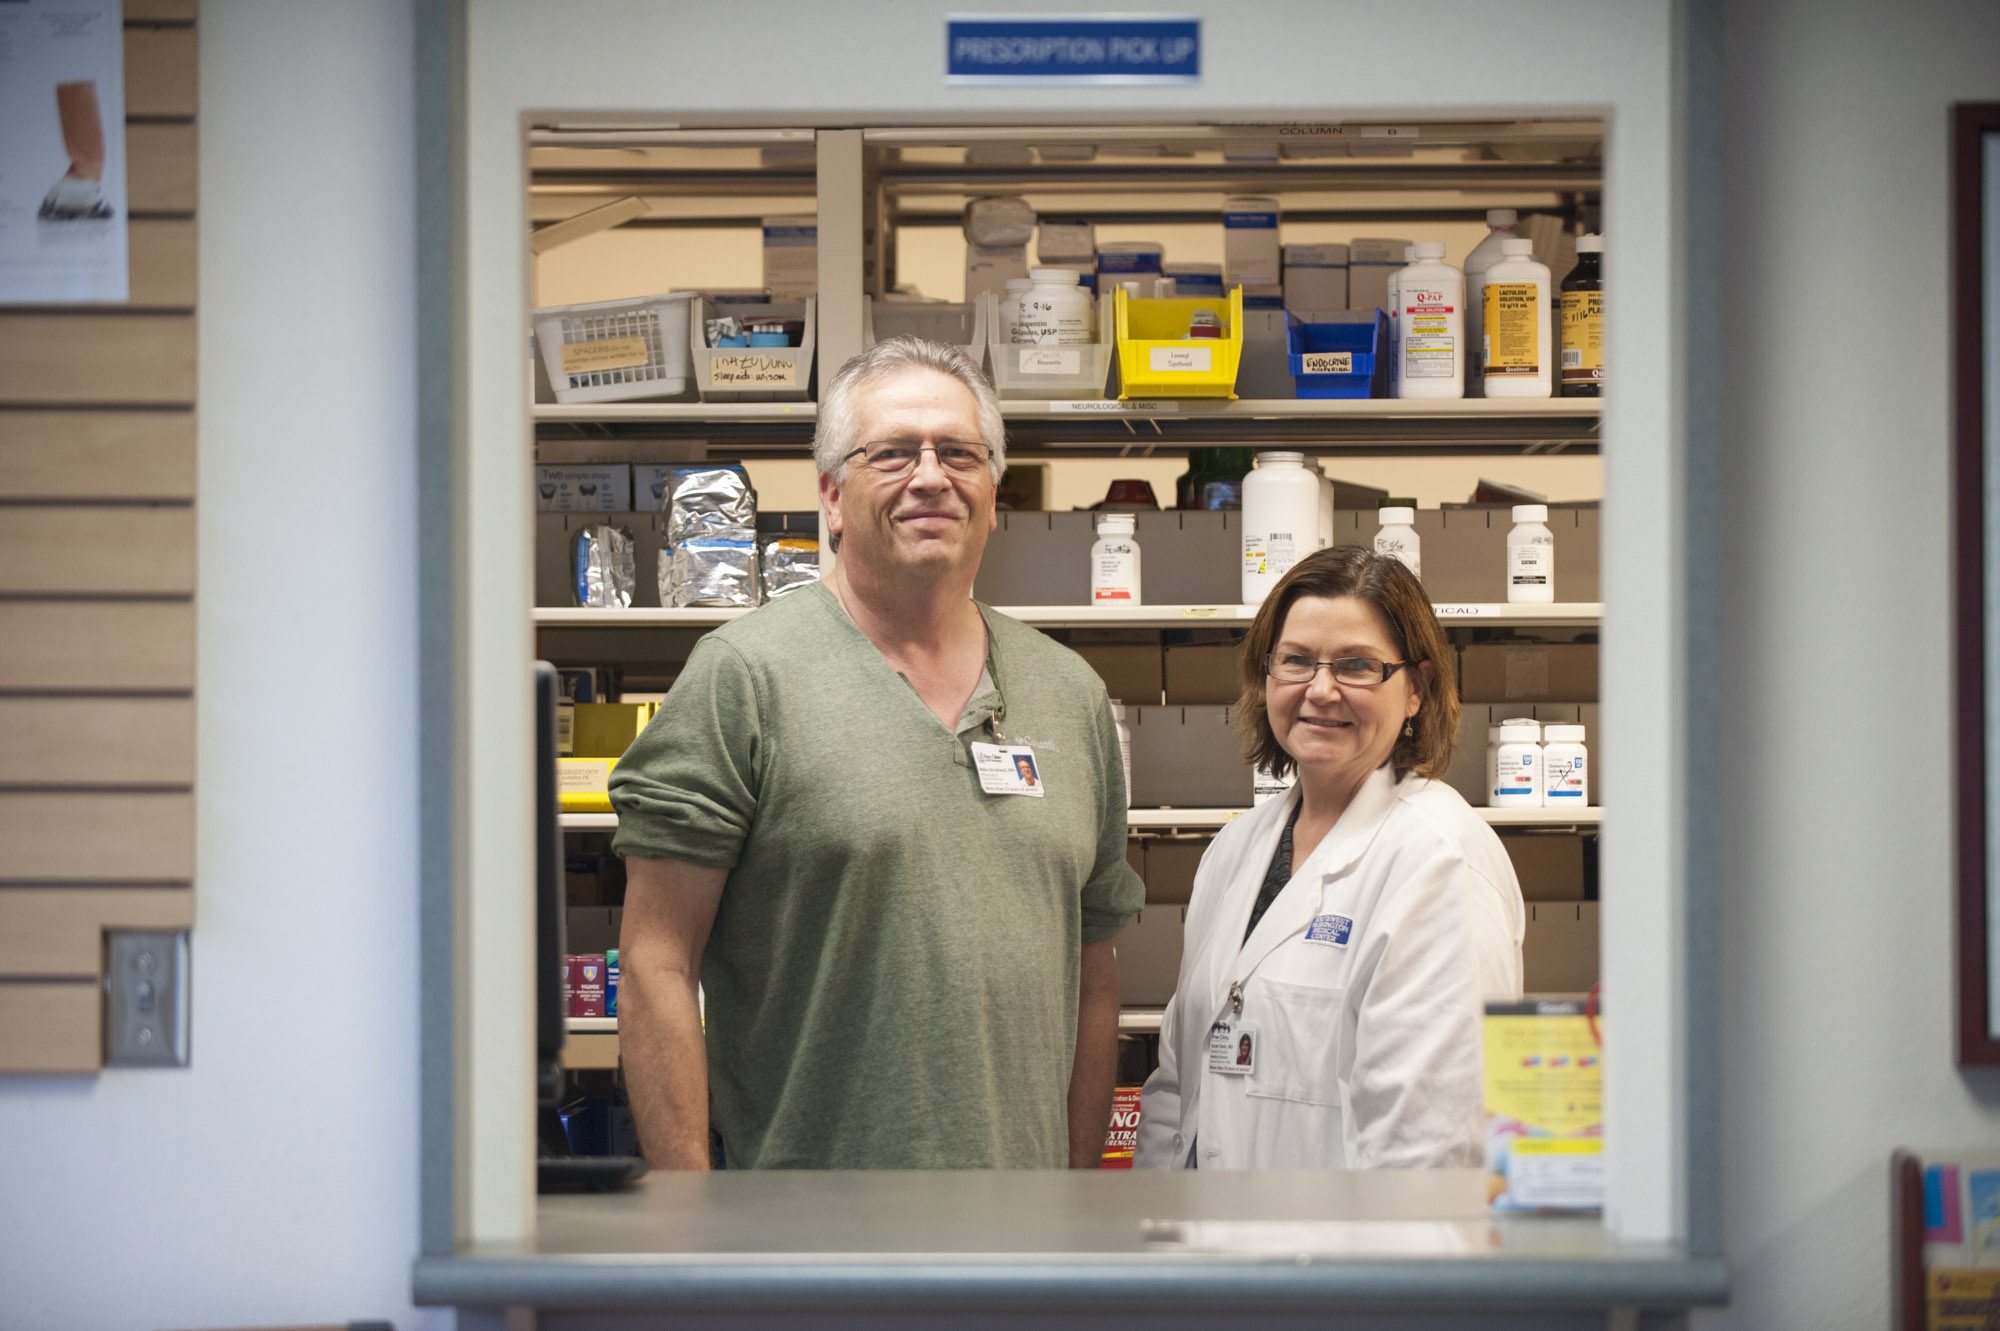 Pharmacist Mike Strickland, left, and Dr. Susan Davis have volunteered at the Free Clinic of Southwest Washington for the last 25 years, making them two of the longest-serving volunteers at the clinic in Vancouver.